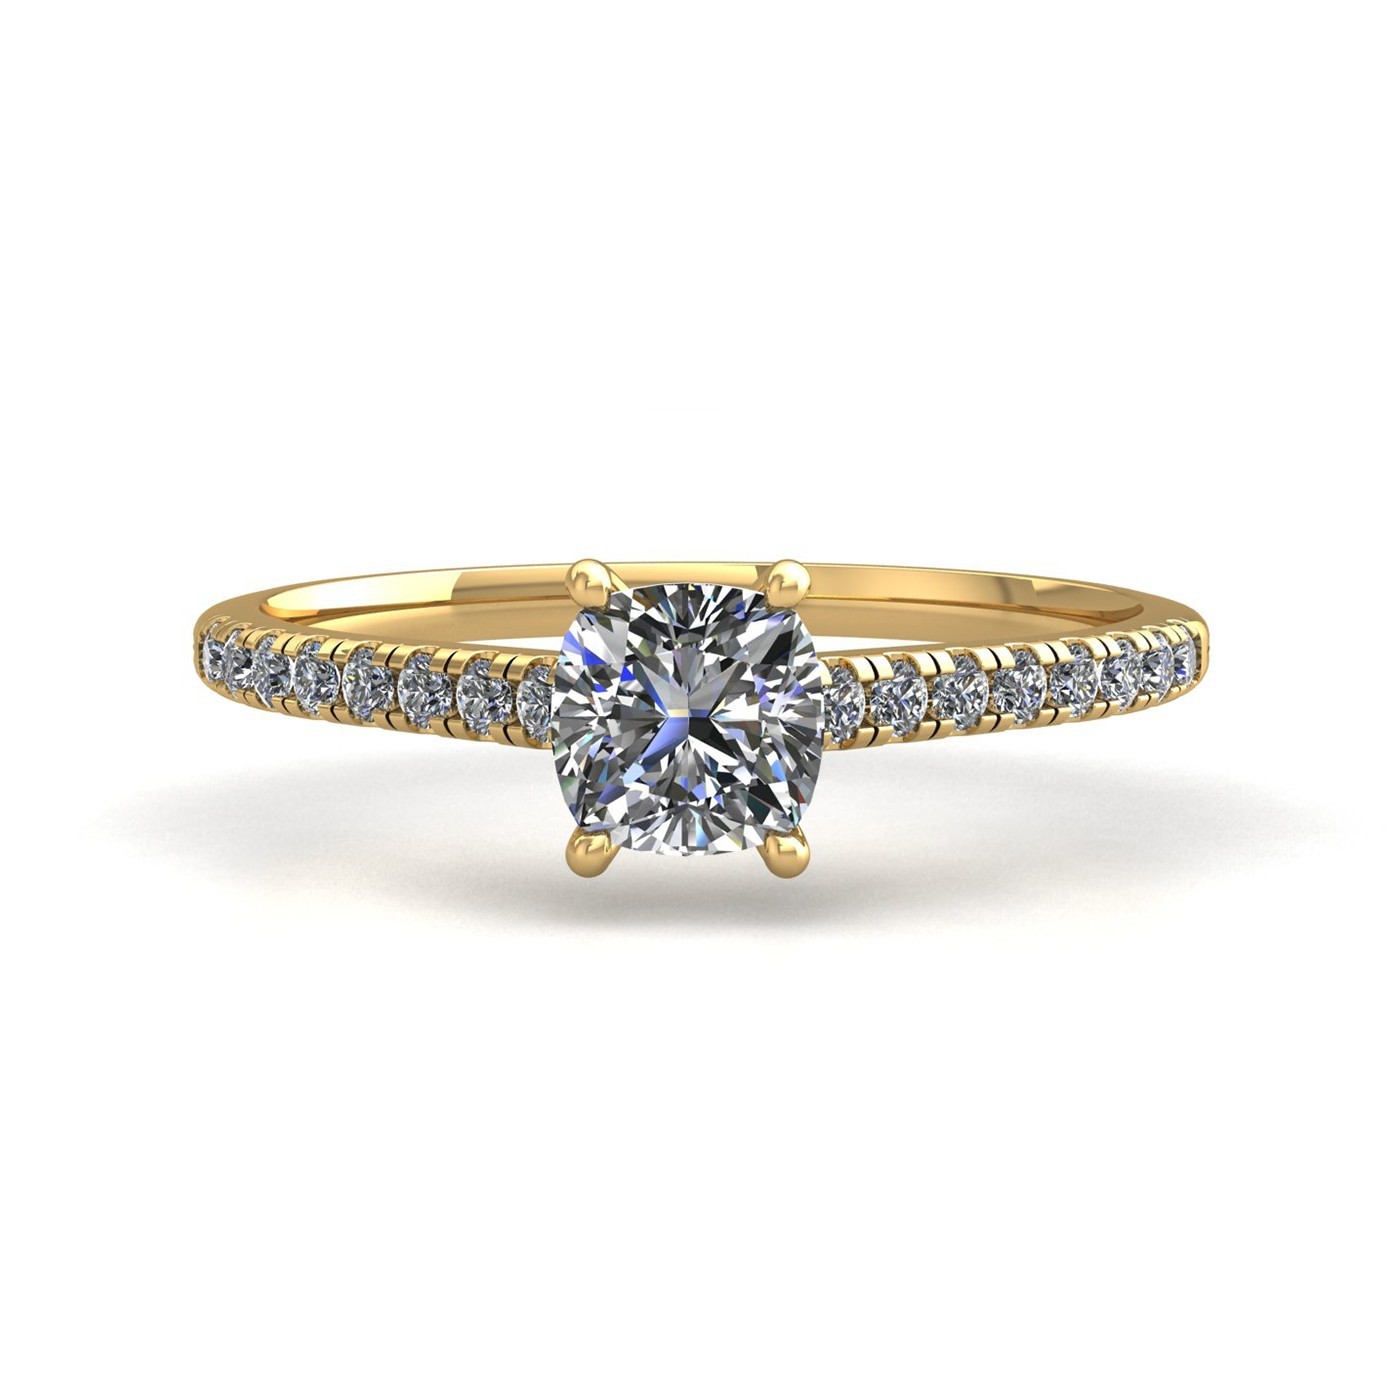 18k yellow gold  0,50 ct 4 prongs cushion cut diamond engagement ring with whisper thin pavÉ set band Photos & images